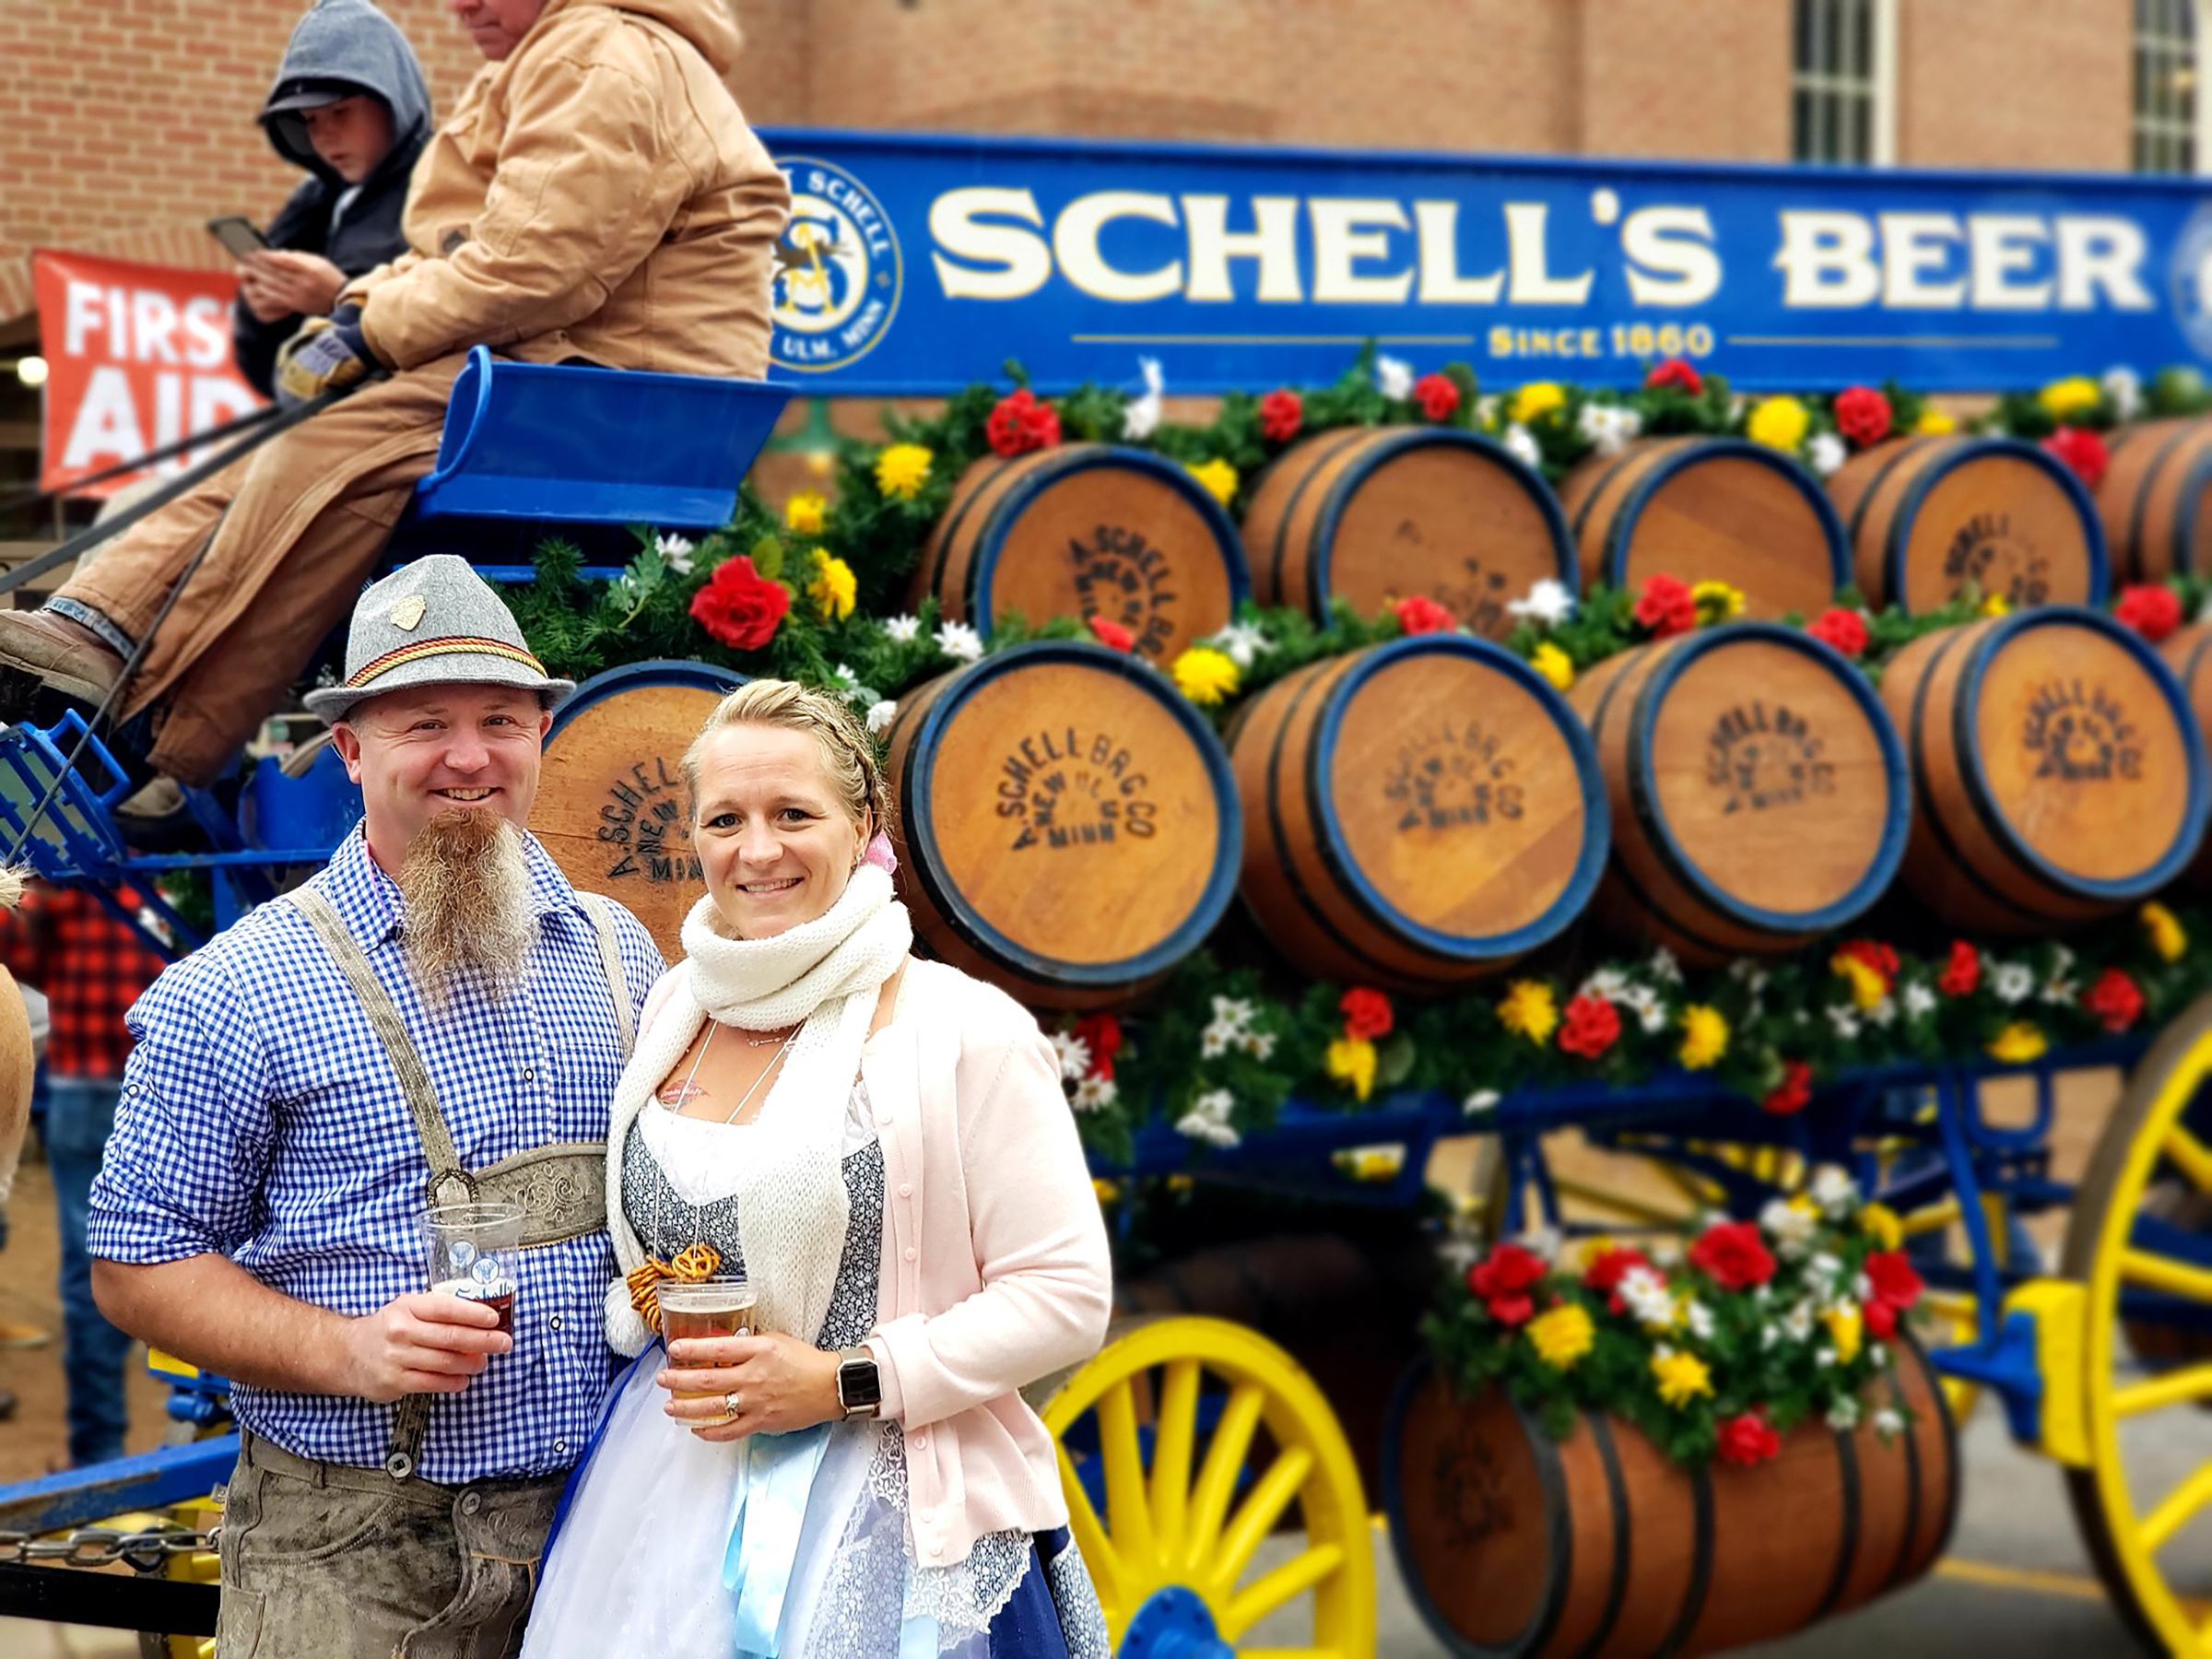 A couple drinks beer in front of Schell's Beer at Oktoberfest in New Ulm.